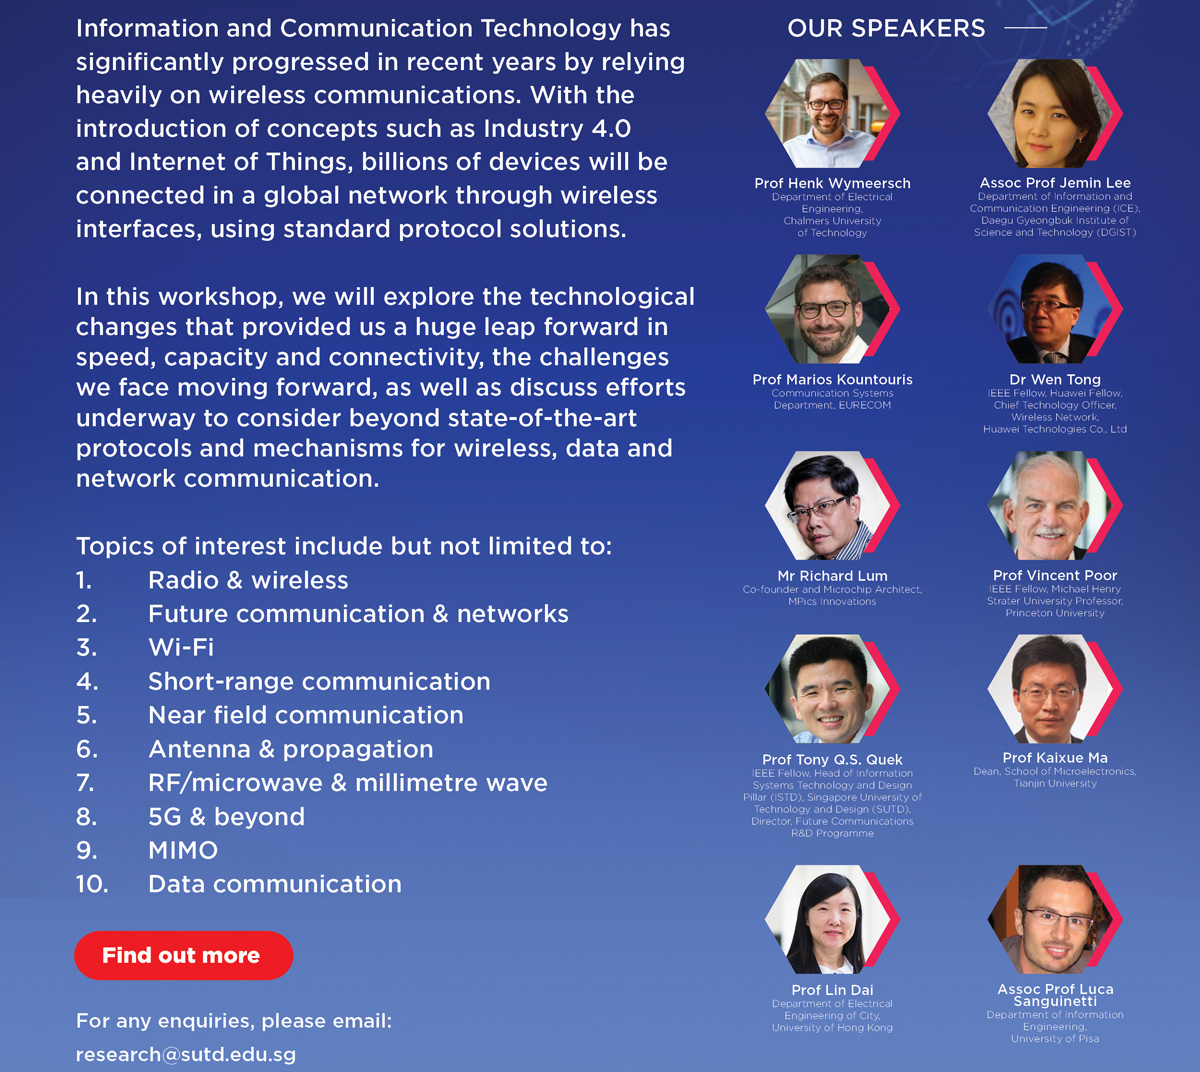 Find out more about the International Workshop on Future Communications